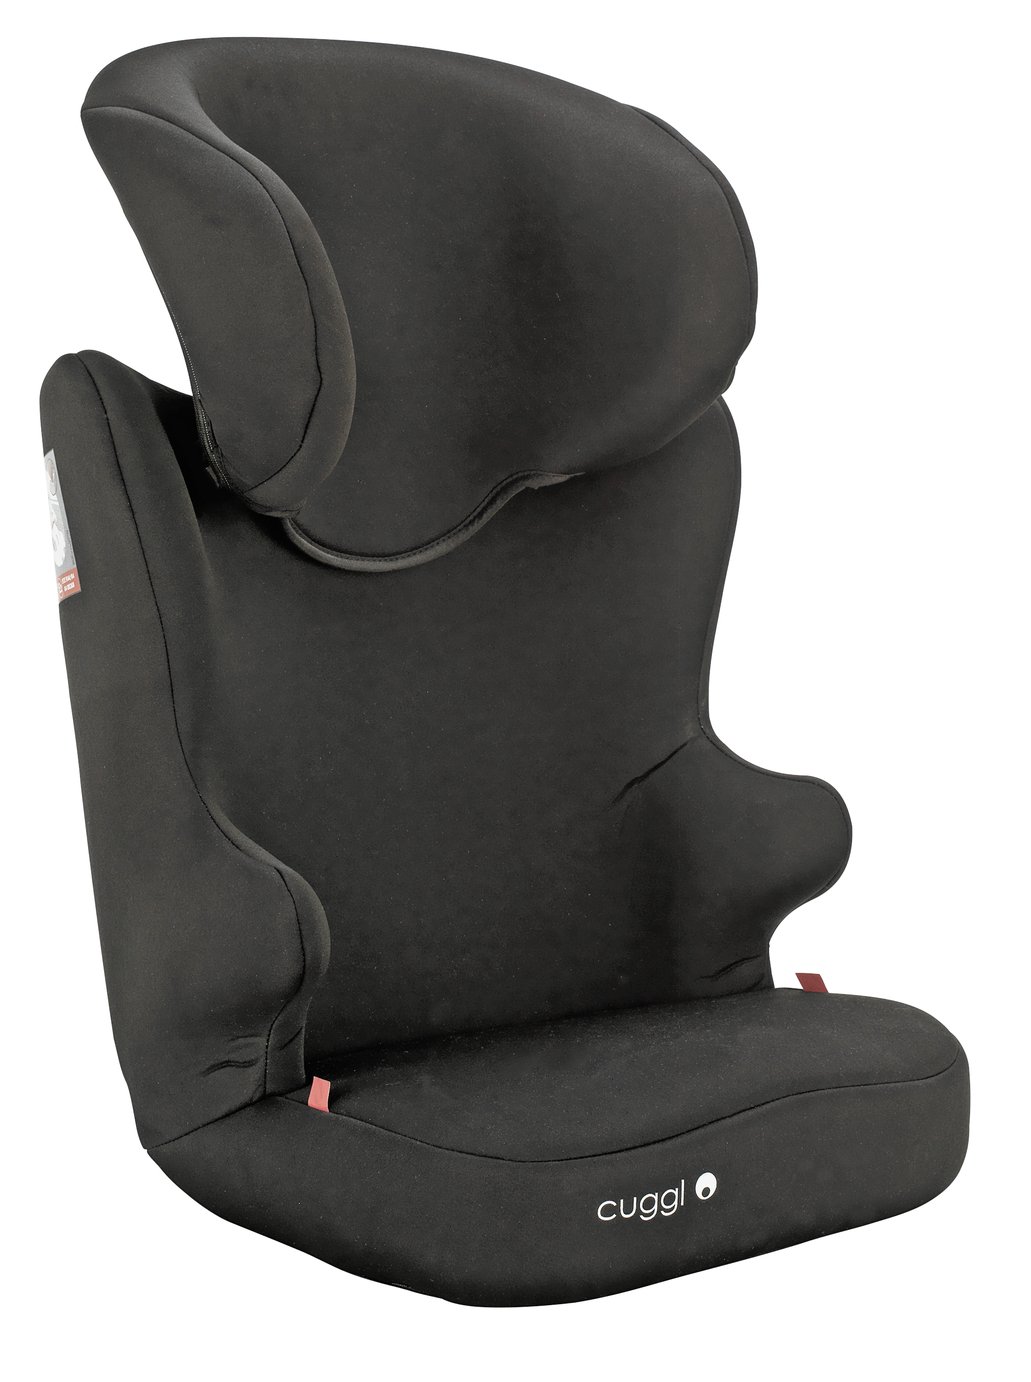 Buy Cuggl Swallow Group 2/3 Car Seat 